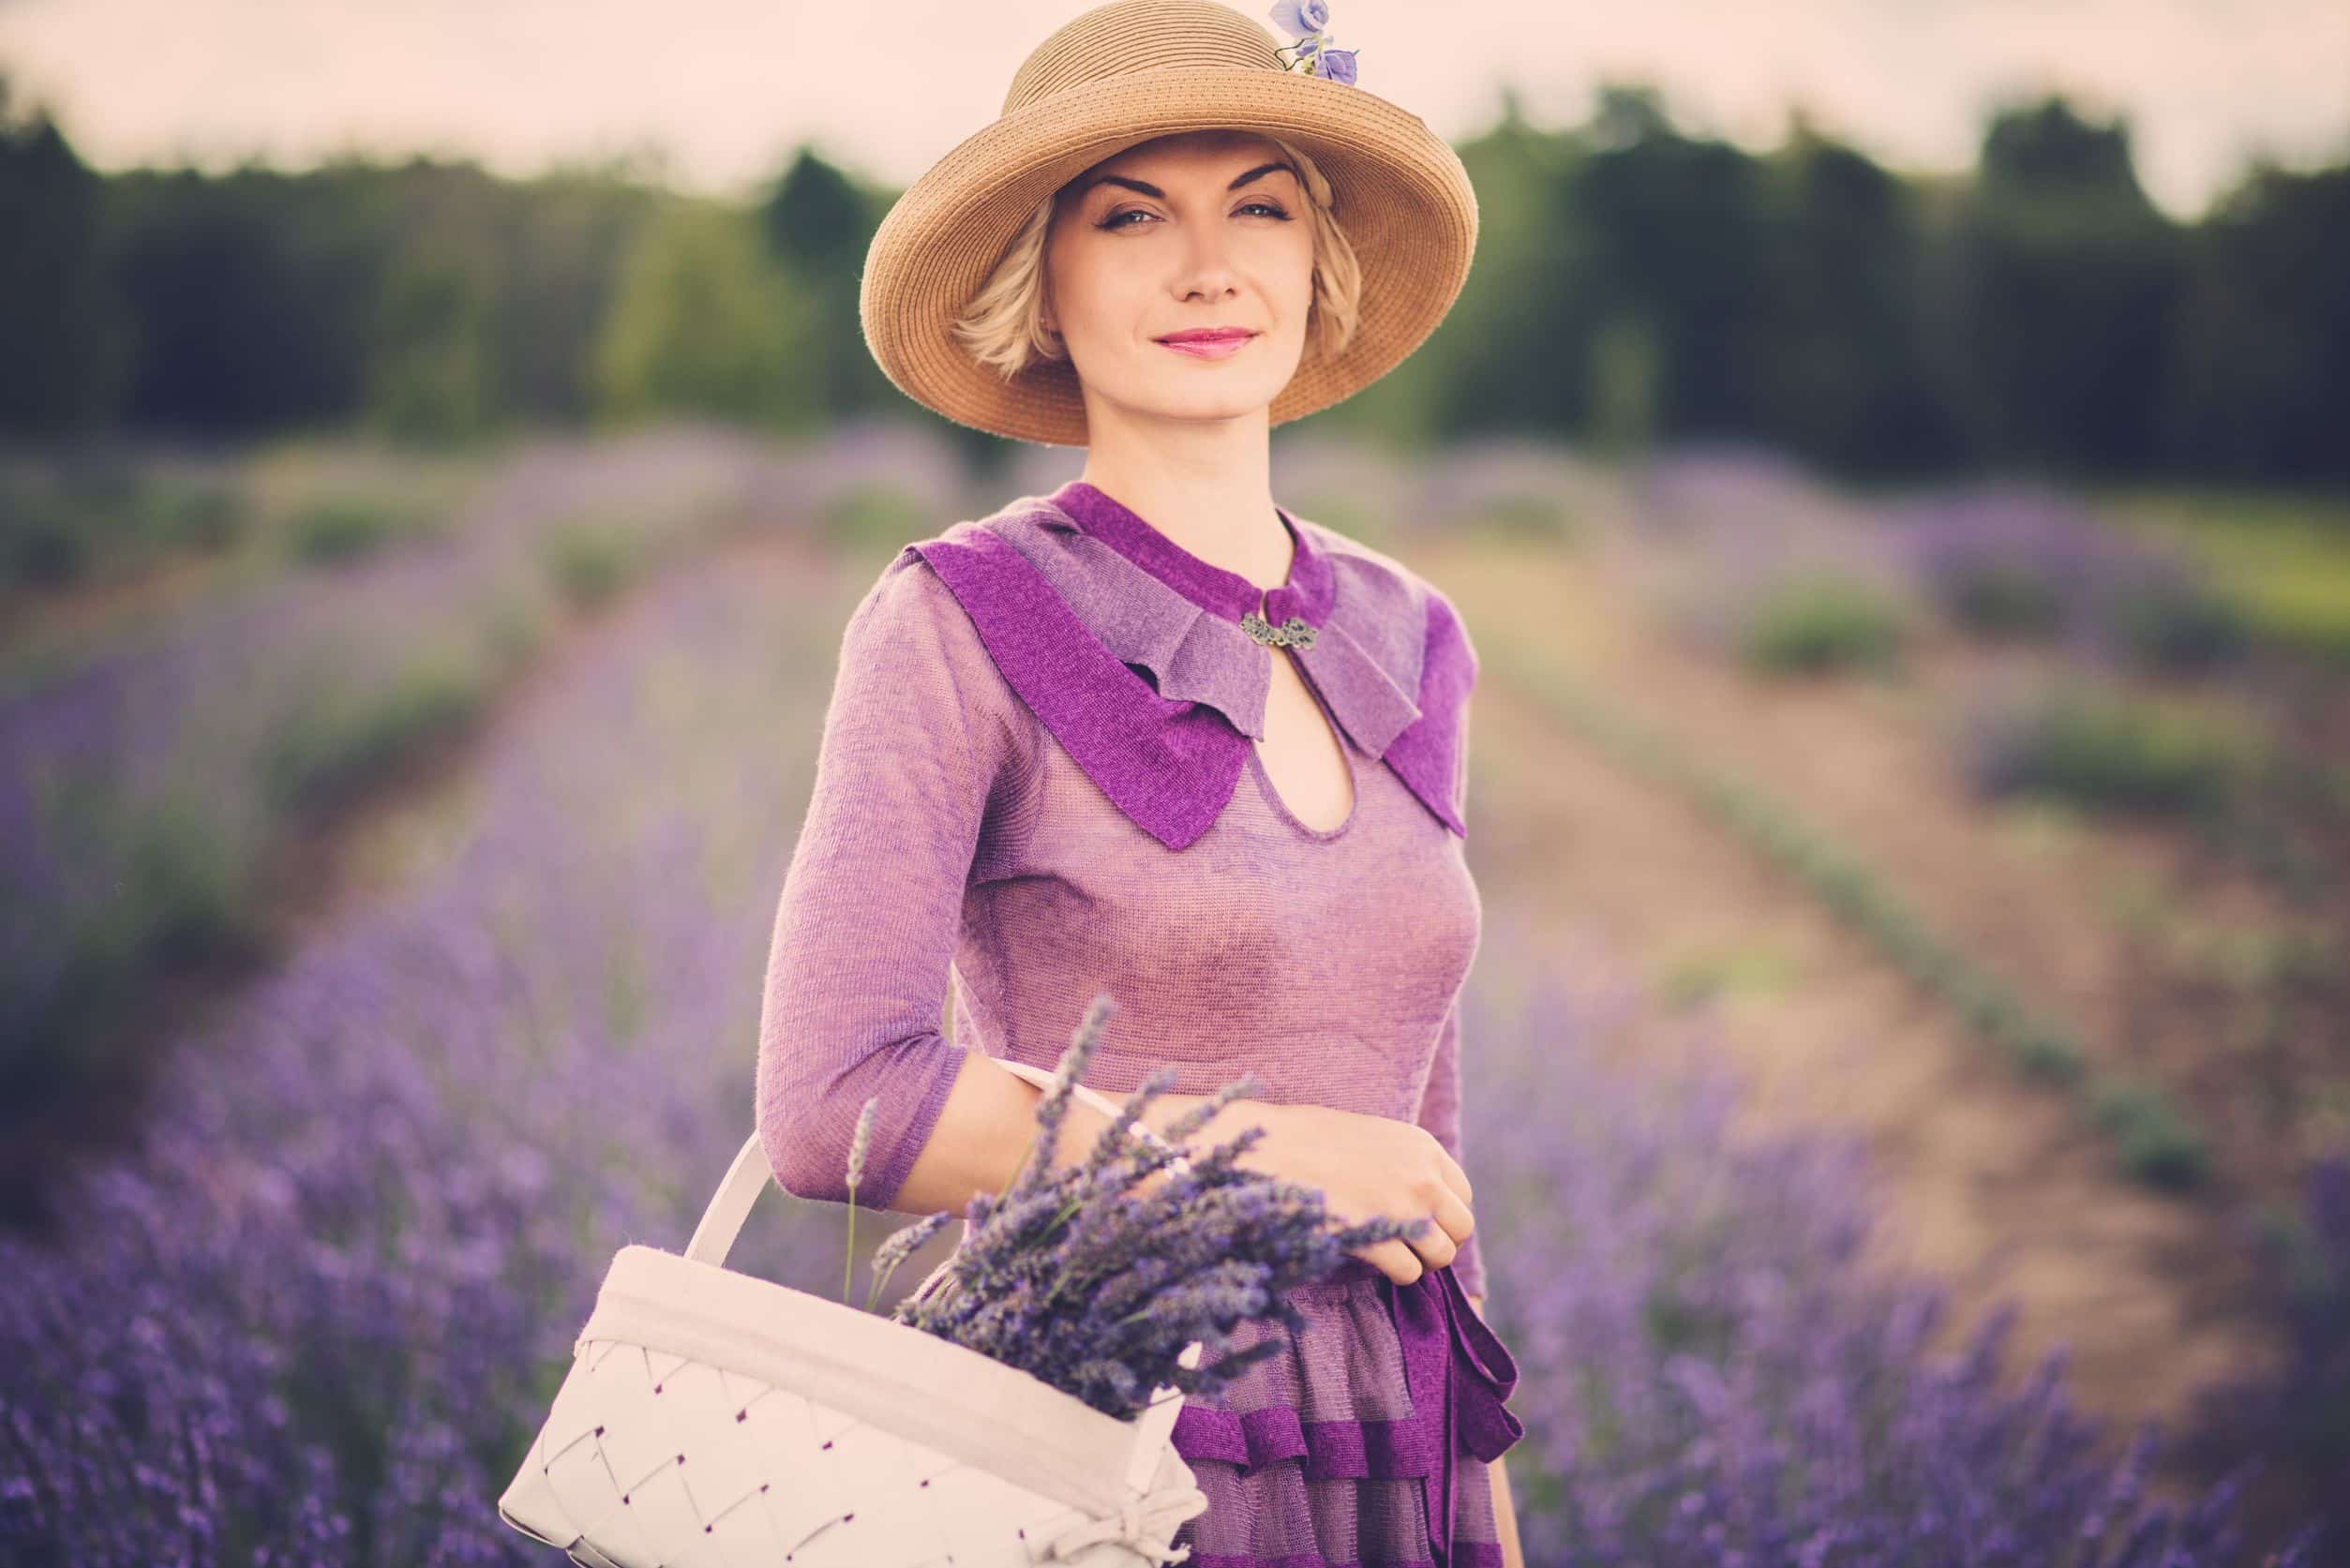 classy woman in a purple dress, standing in a field of lavender, with a basket of flowers